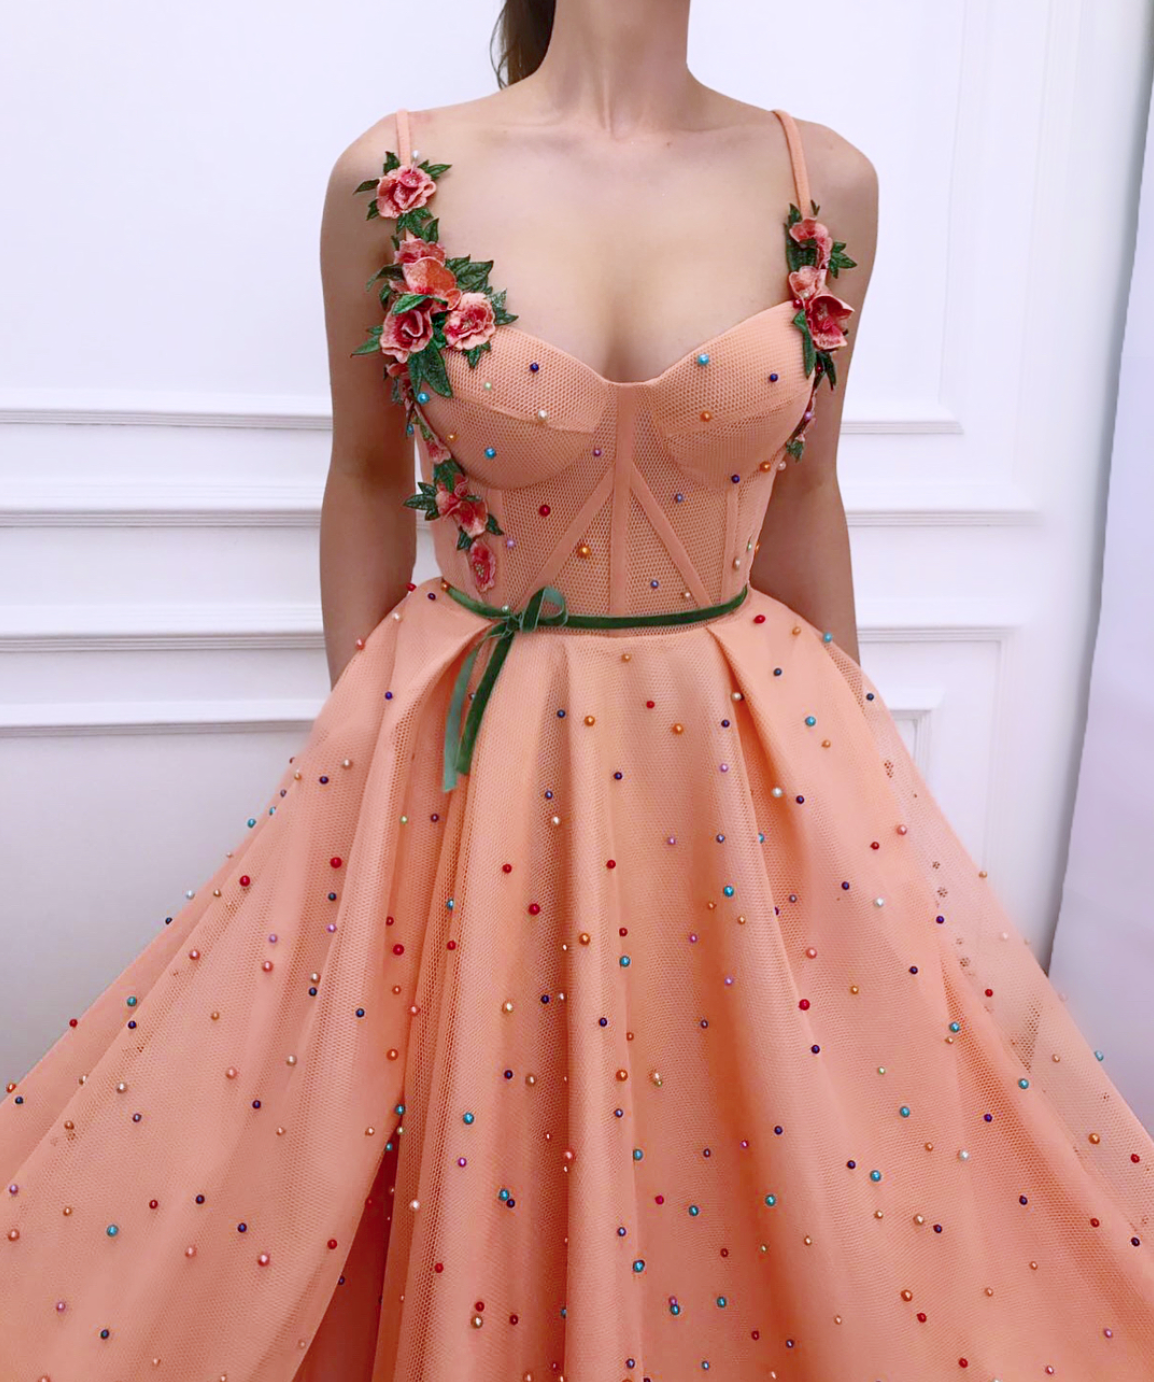 Peach A-Line dress with beading, spaghetti straps and embroidery